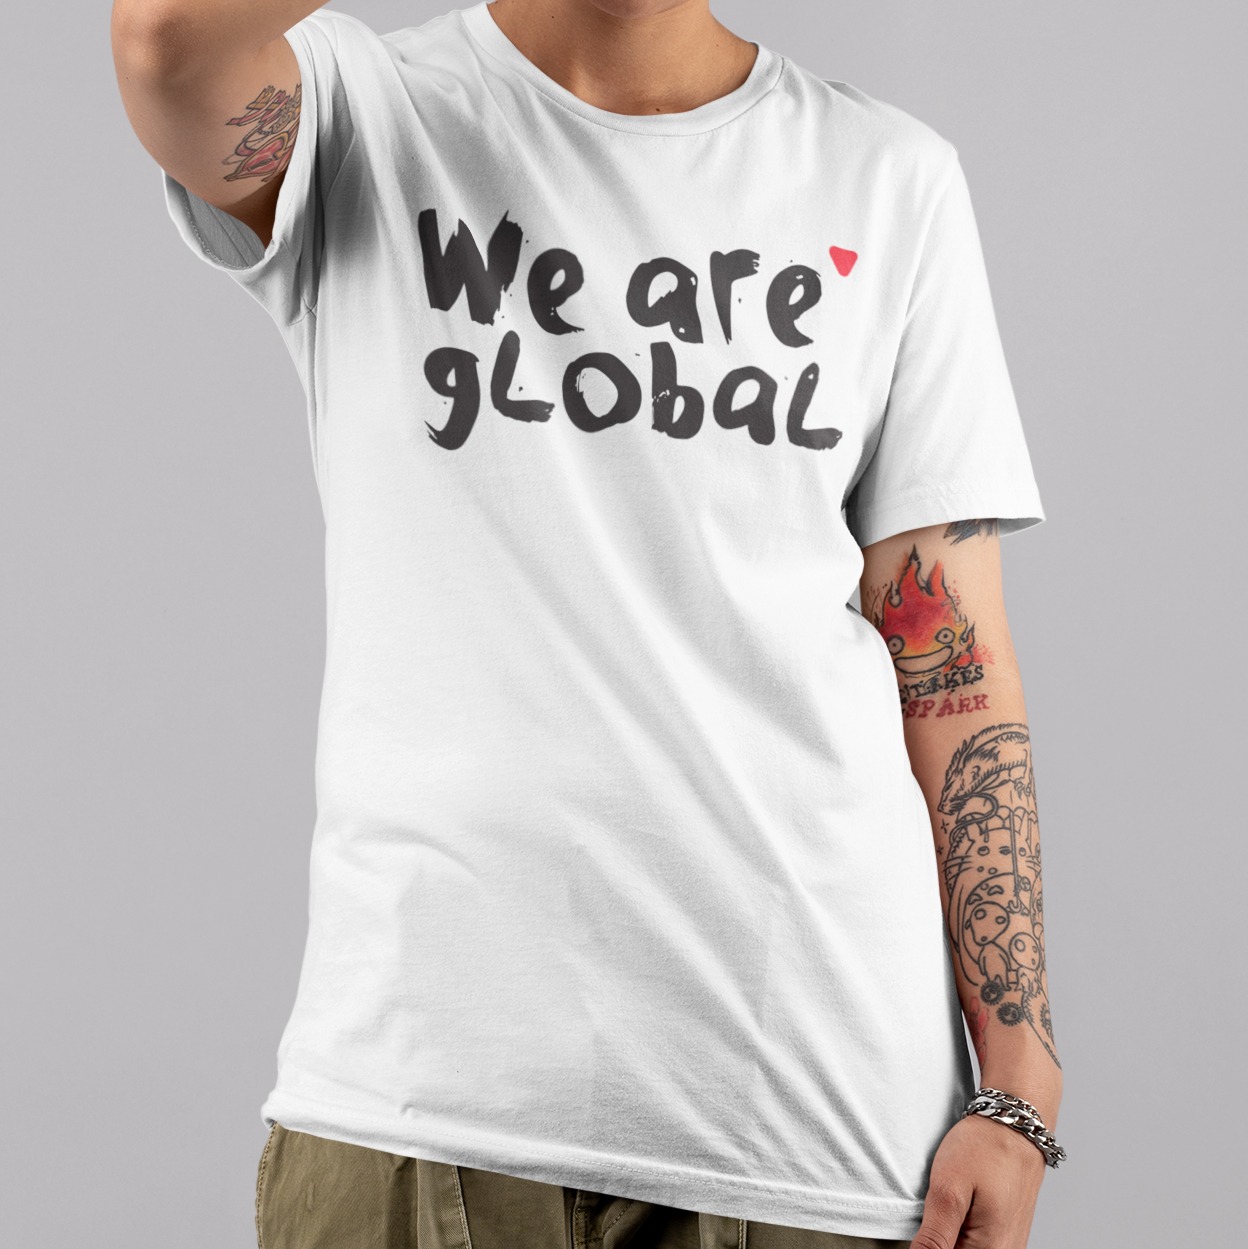 T Shirt Mockup Of An Androgynous Woman With Tattooed Arms At A Studio 32929 Copy Global Underground